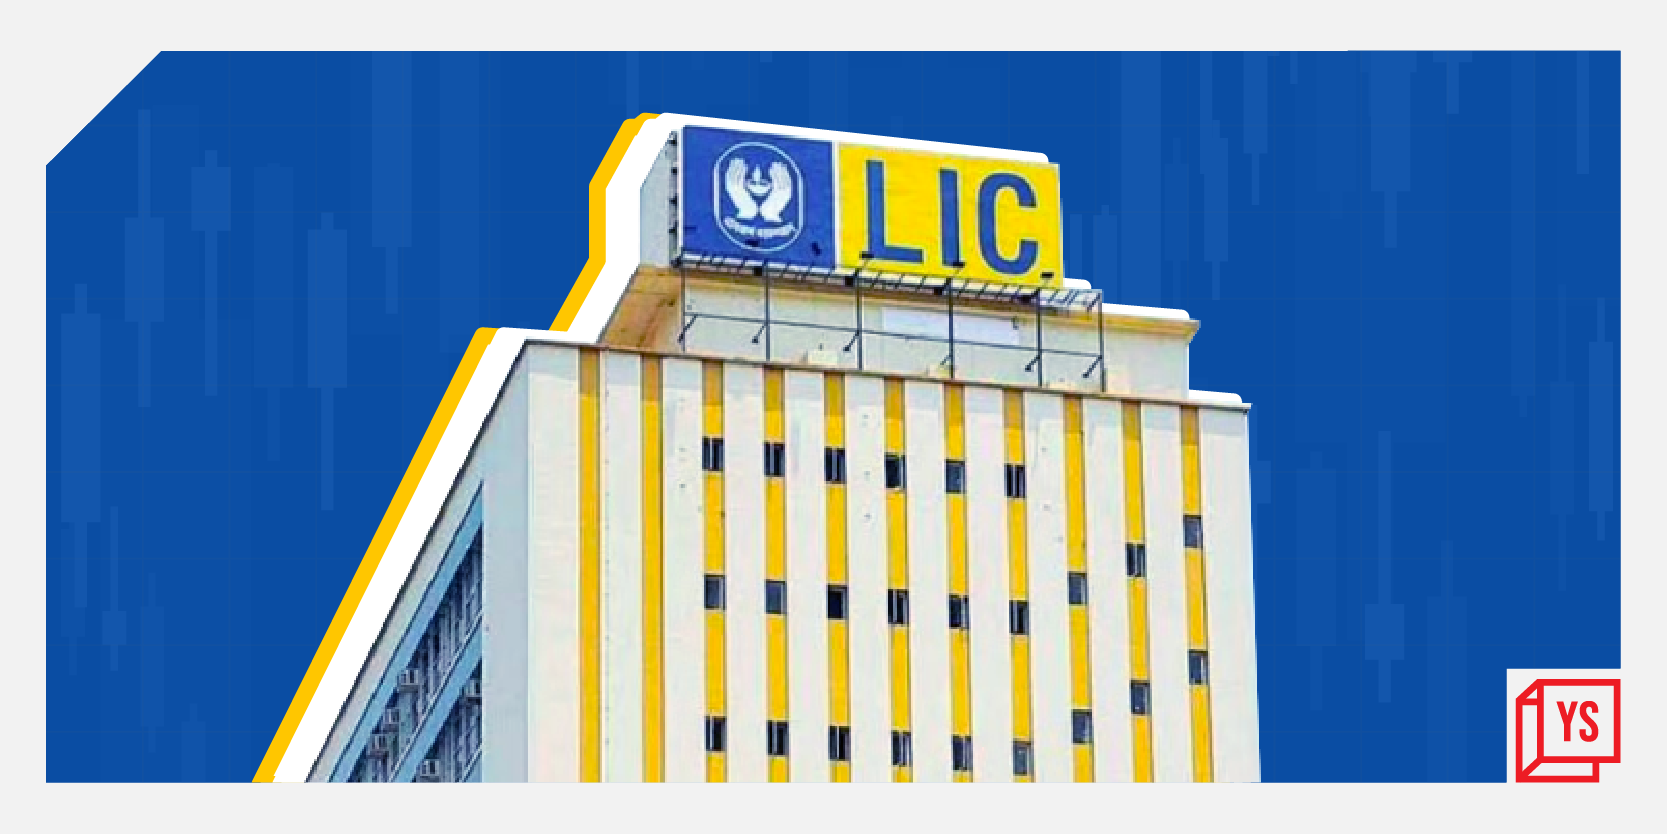 LIC net profit declines by 17.4 pc in Q4, declares dividend of Rs 1.50 per share